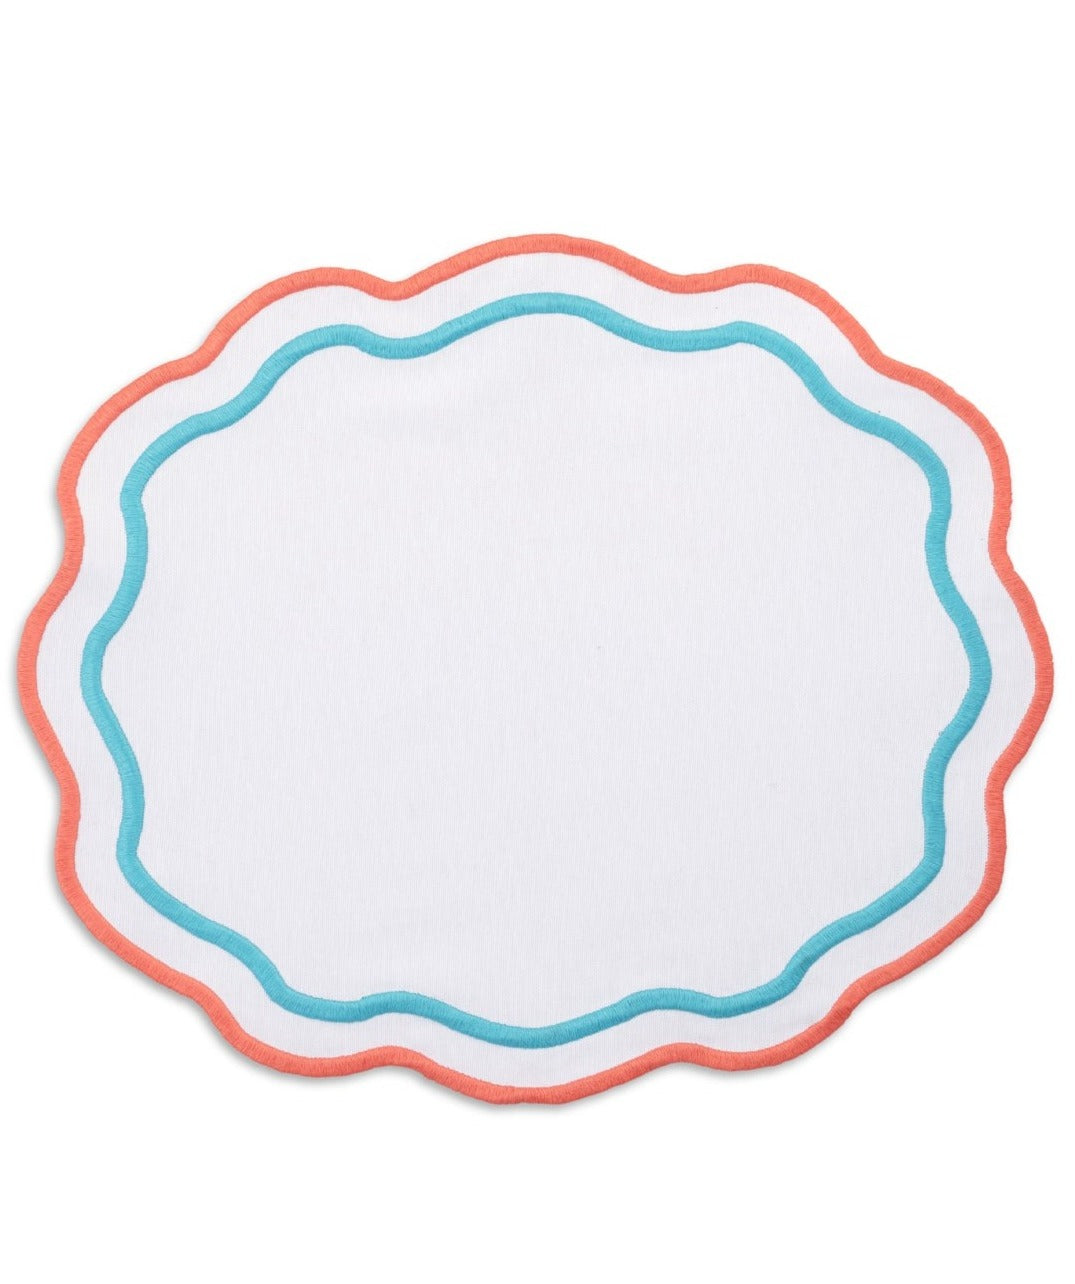 Morgan Placemat and Napkin Set in Turquoise